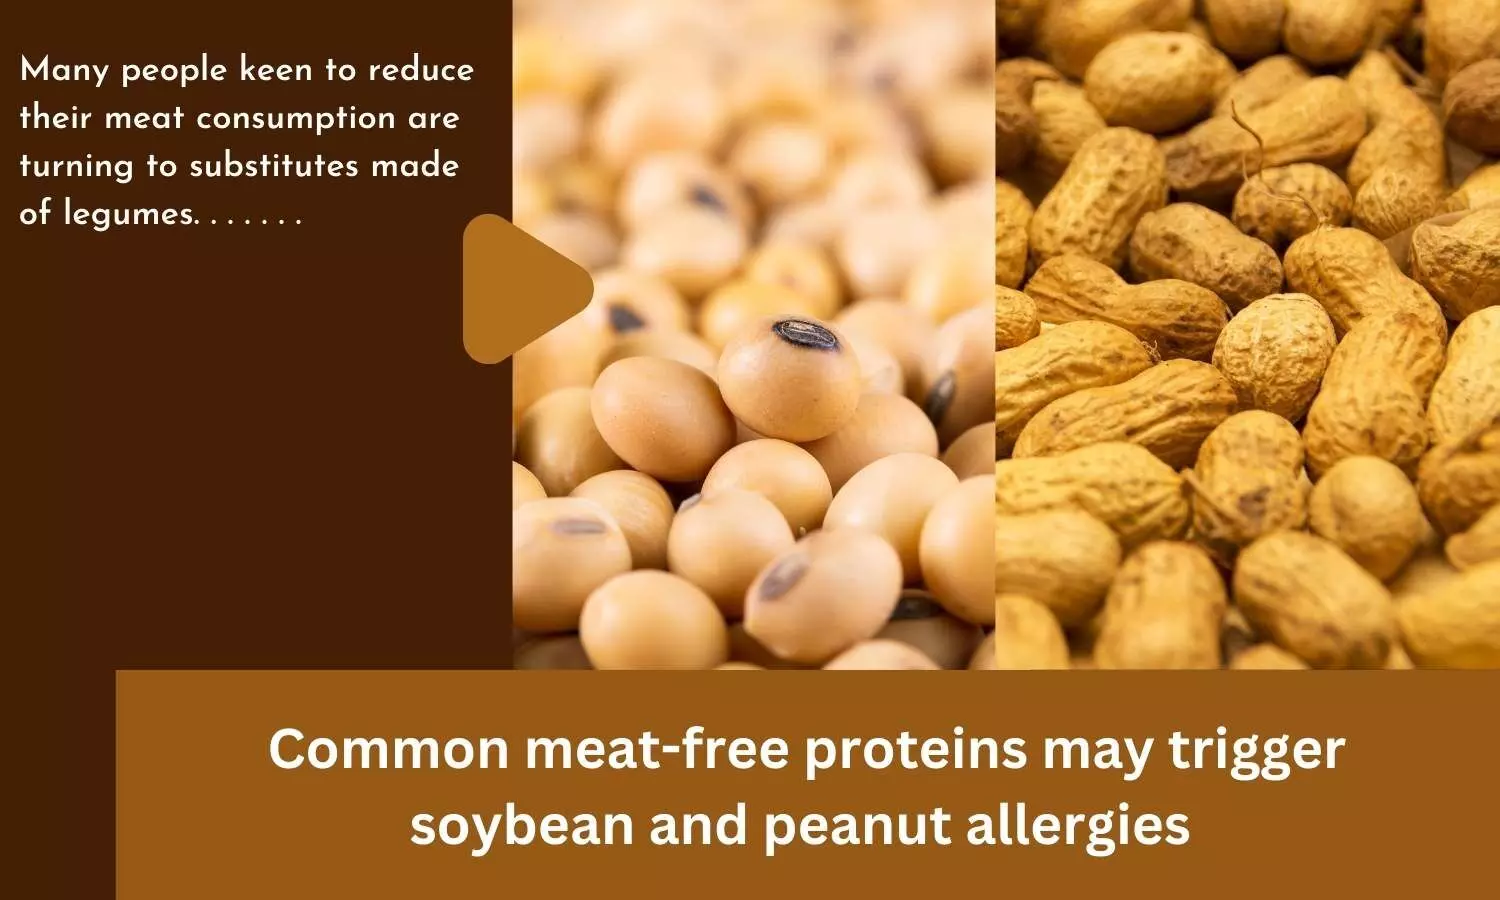 Common meat-free proteins may trigger soybean and peanut allergies